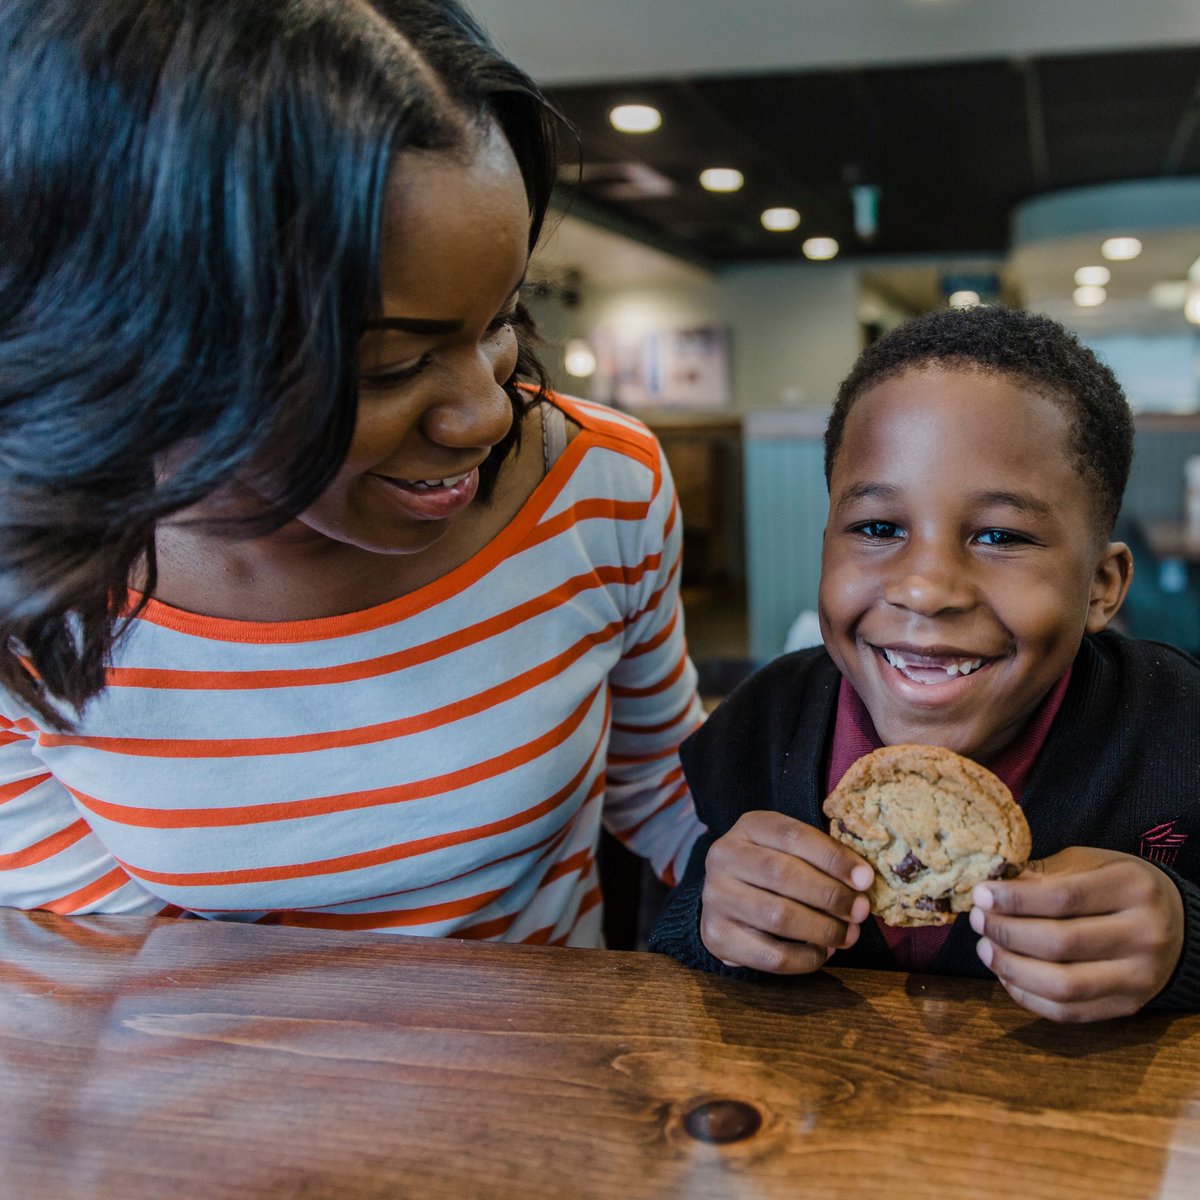 Looking for a family-friendly, convenient sit-down option? Look no further! We're here to serve you with speed and a smile. #FamilyFirst Check out our welcoming spot, perfect for busy families on the go! 🏃💨✨